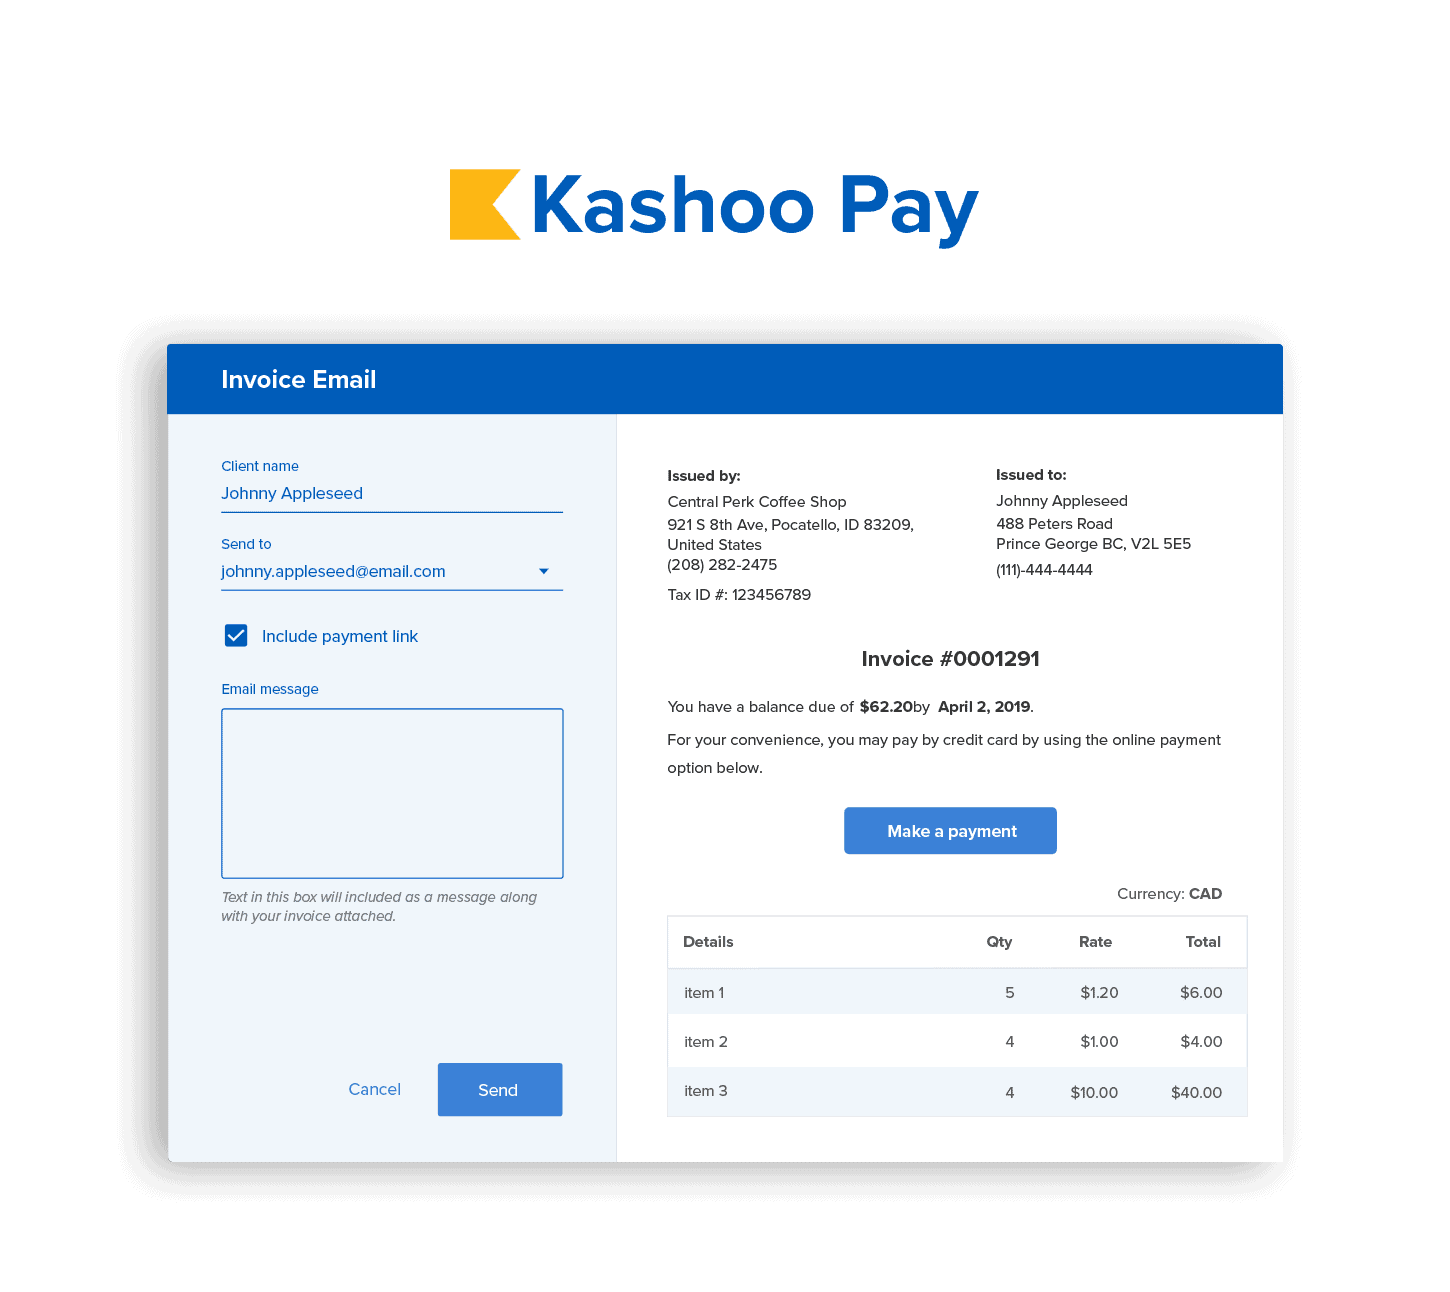 Get paid faster with Kashoo pay